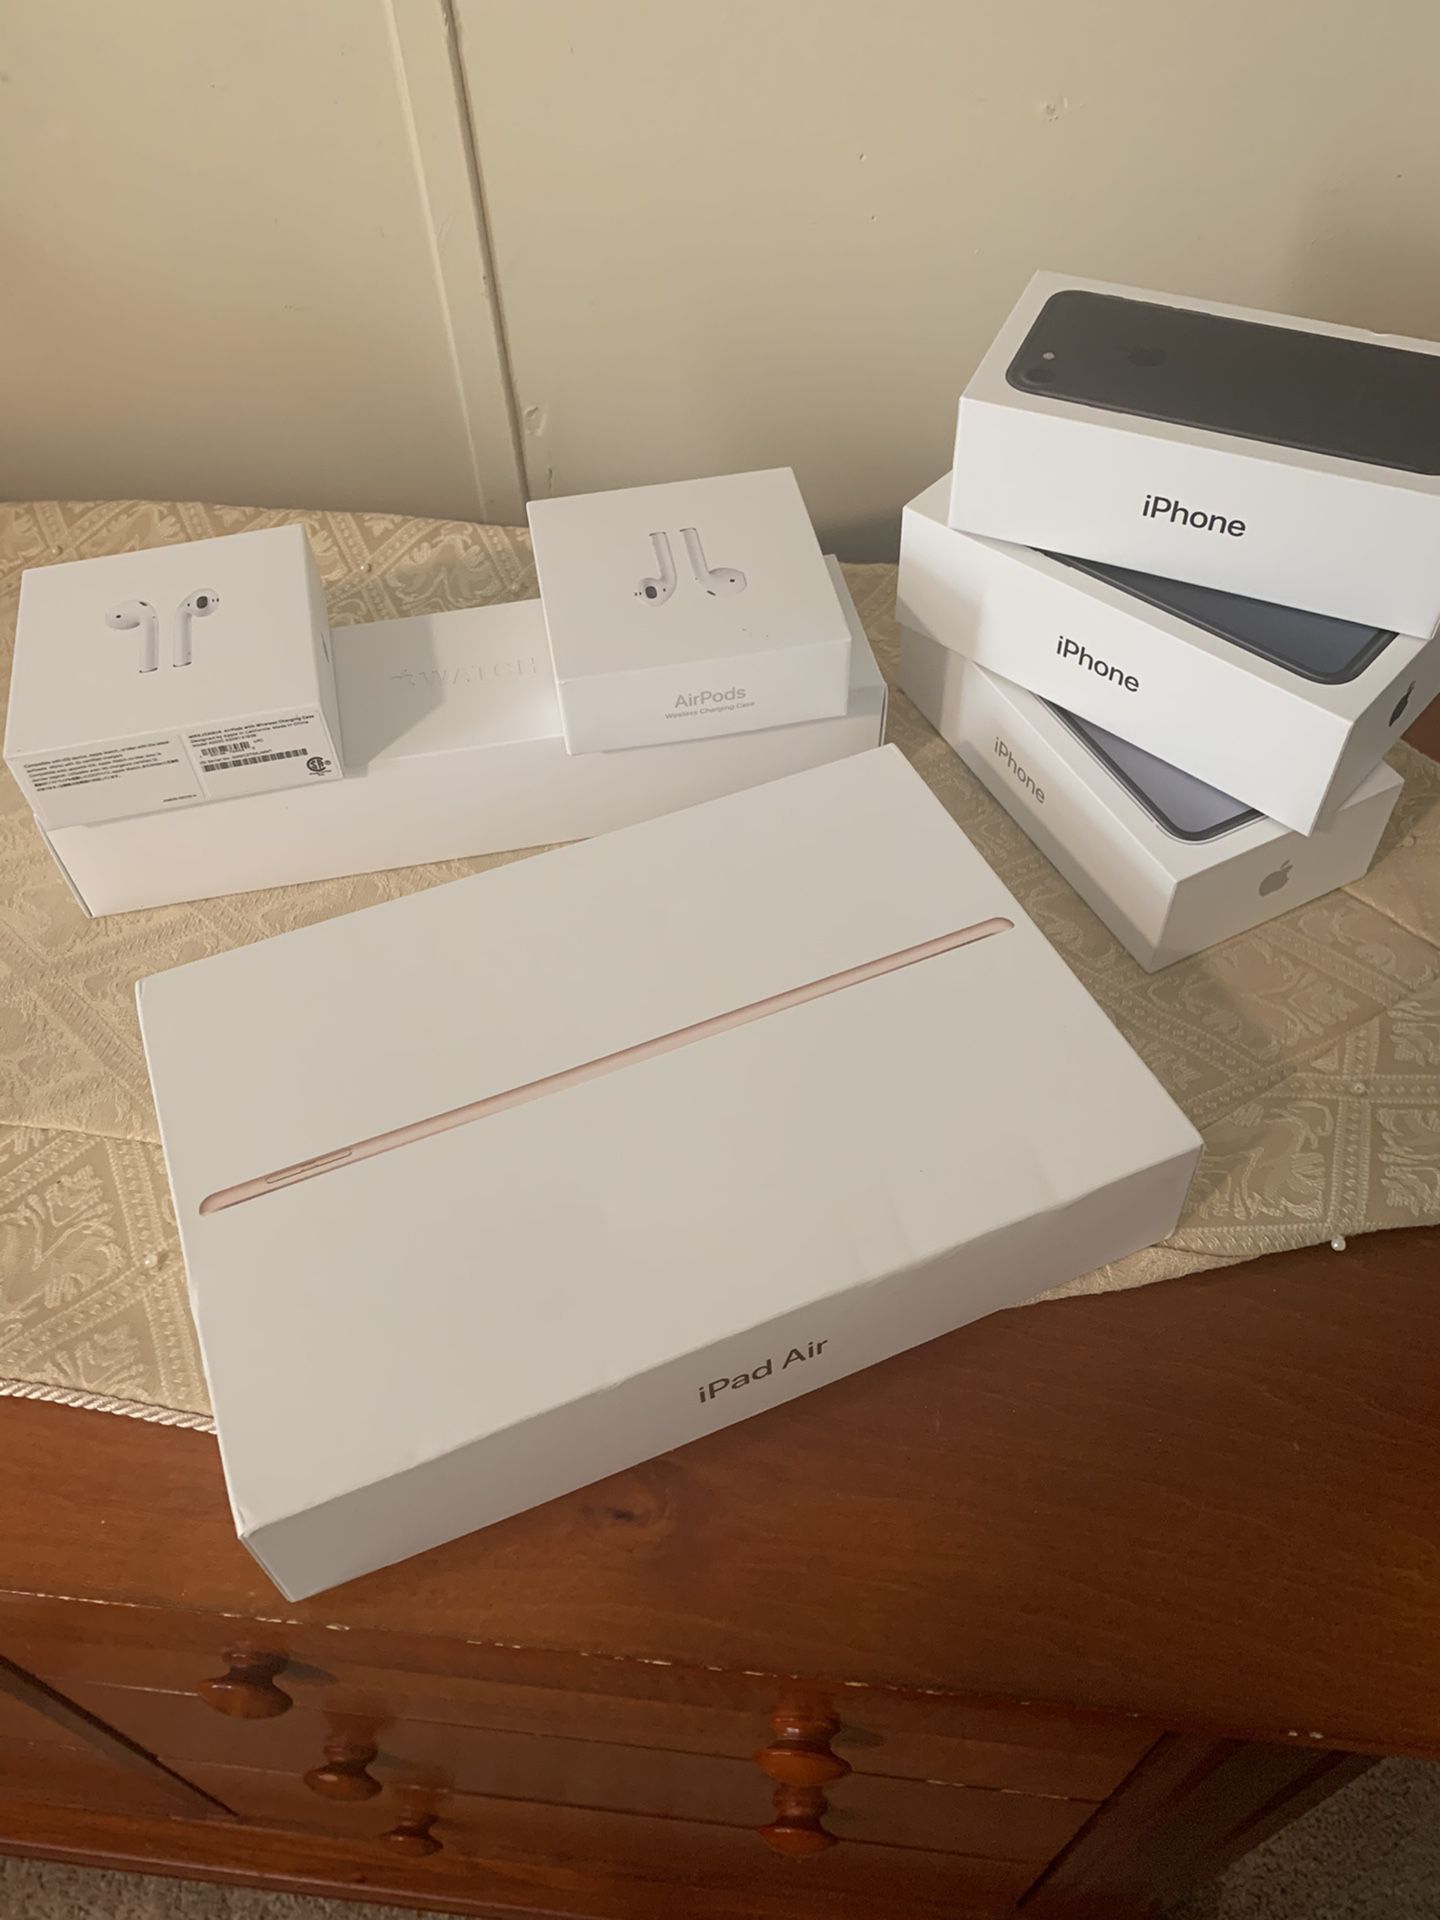 I sell some empty cases, one for iPad Air, two cases for iPhone XR, one for iPhone 7, two for air pods, and one for an Apple gold 5 series watch. in